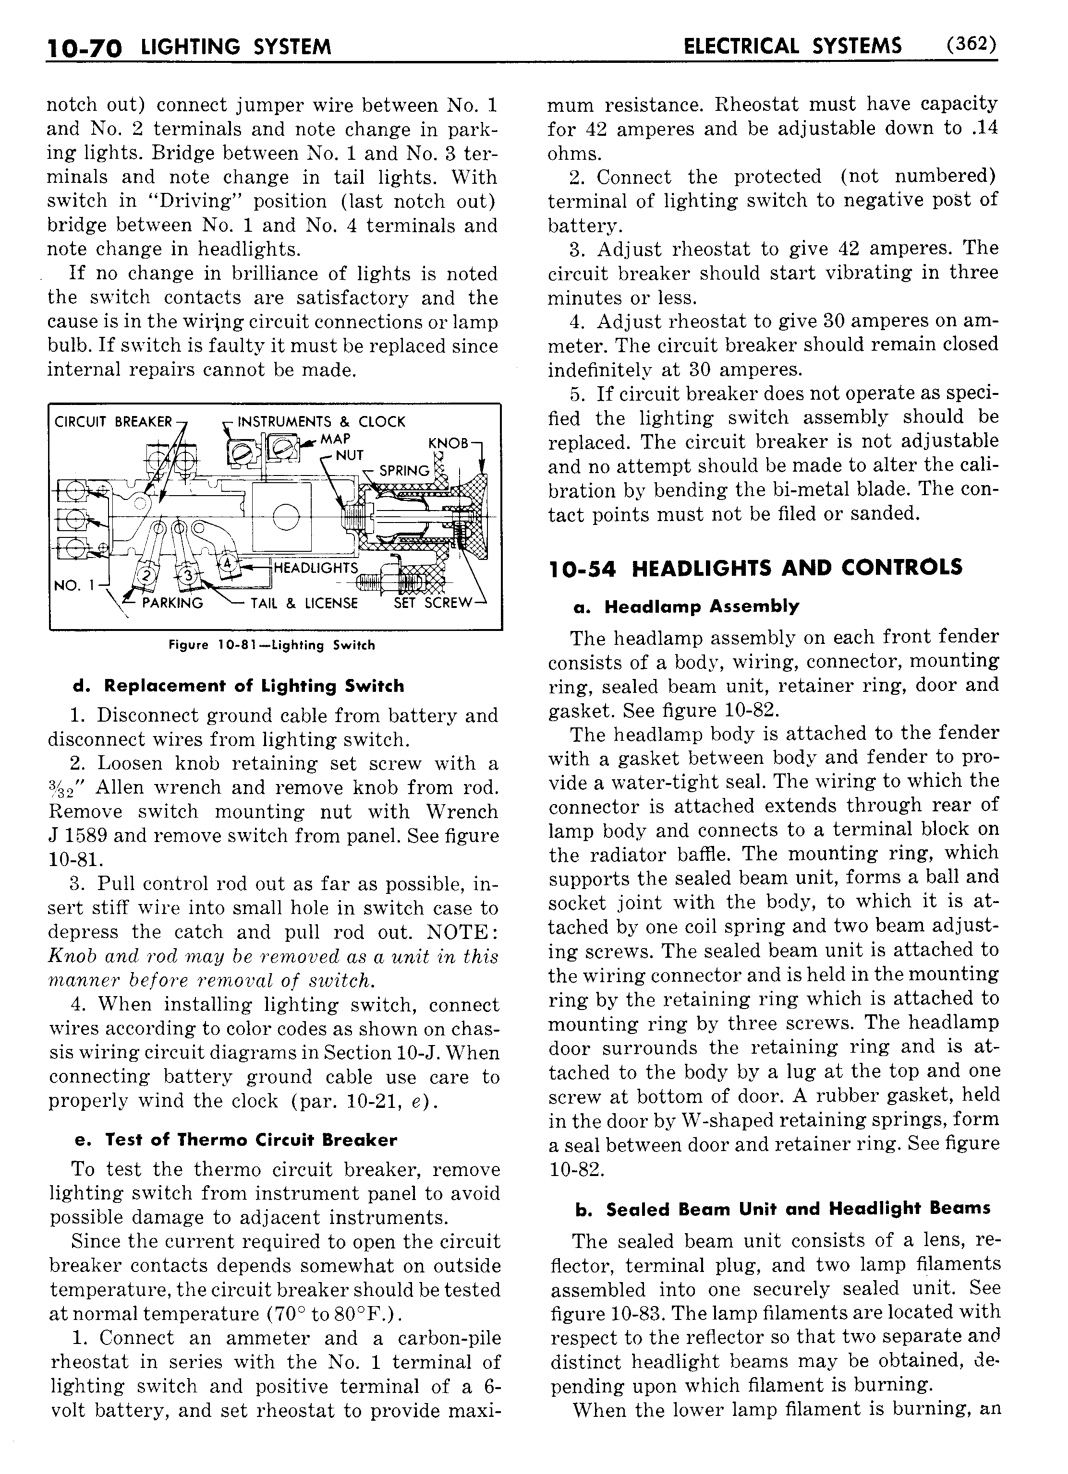 n_11 1951 Buick Shop Manual - Electrical Systems-070-070.jpg